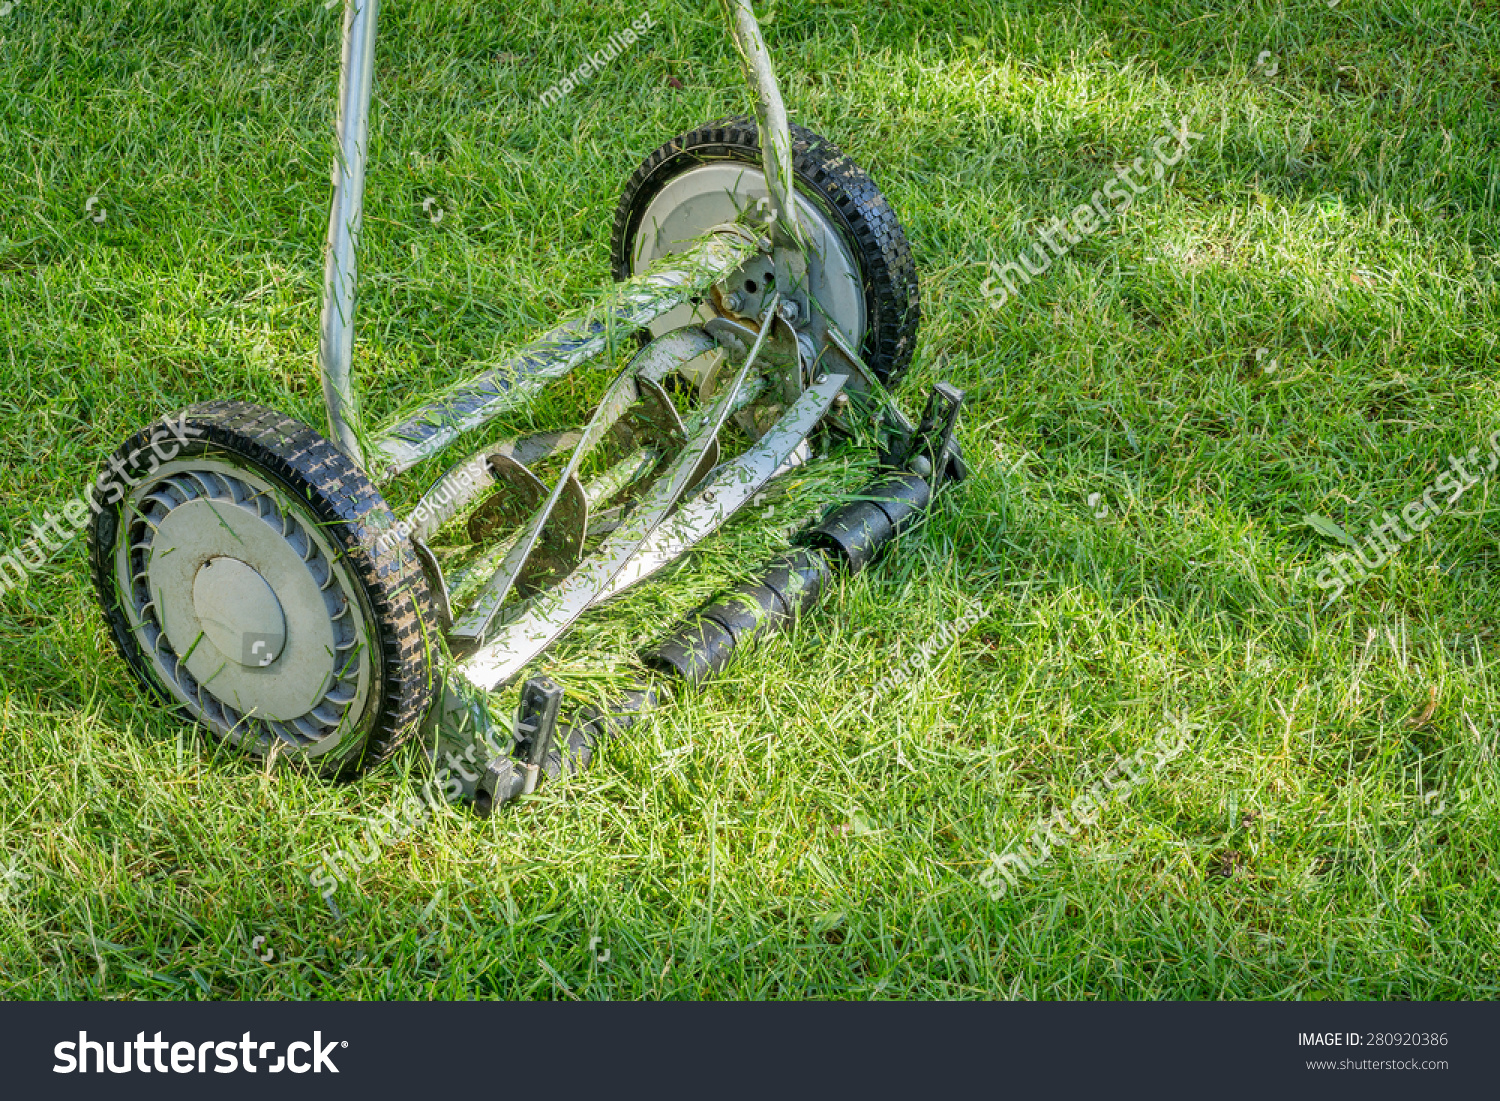 hand lawn mower close up with grass clips #280920386